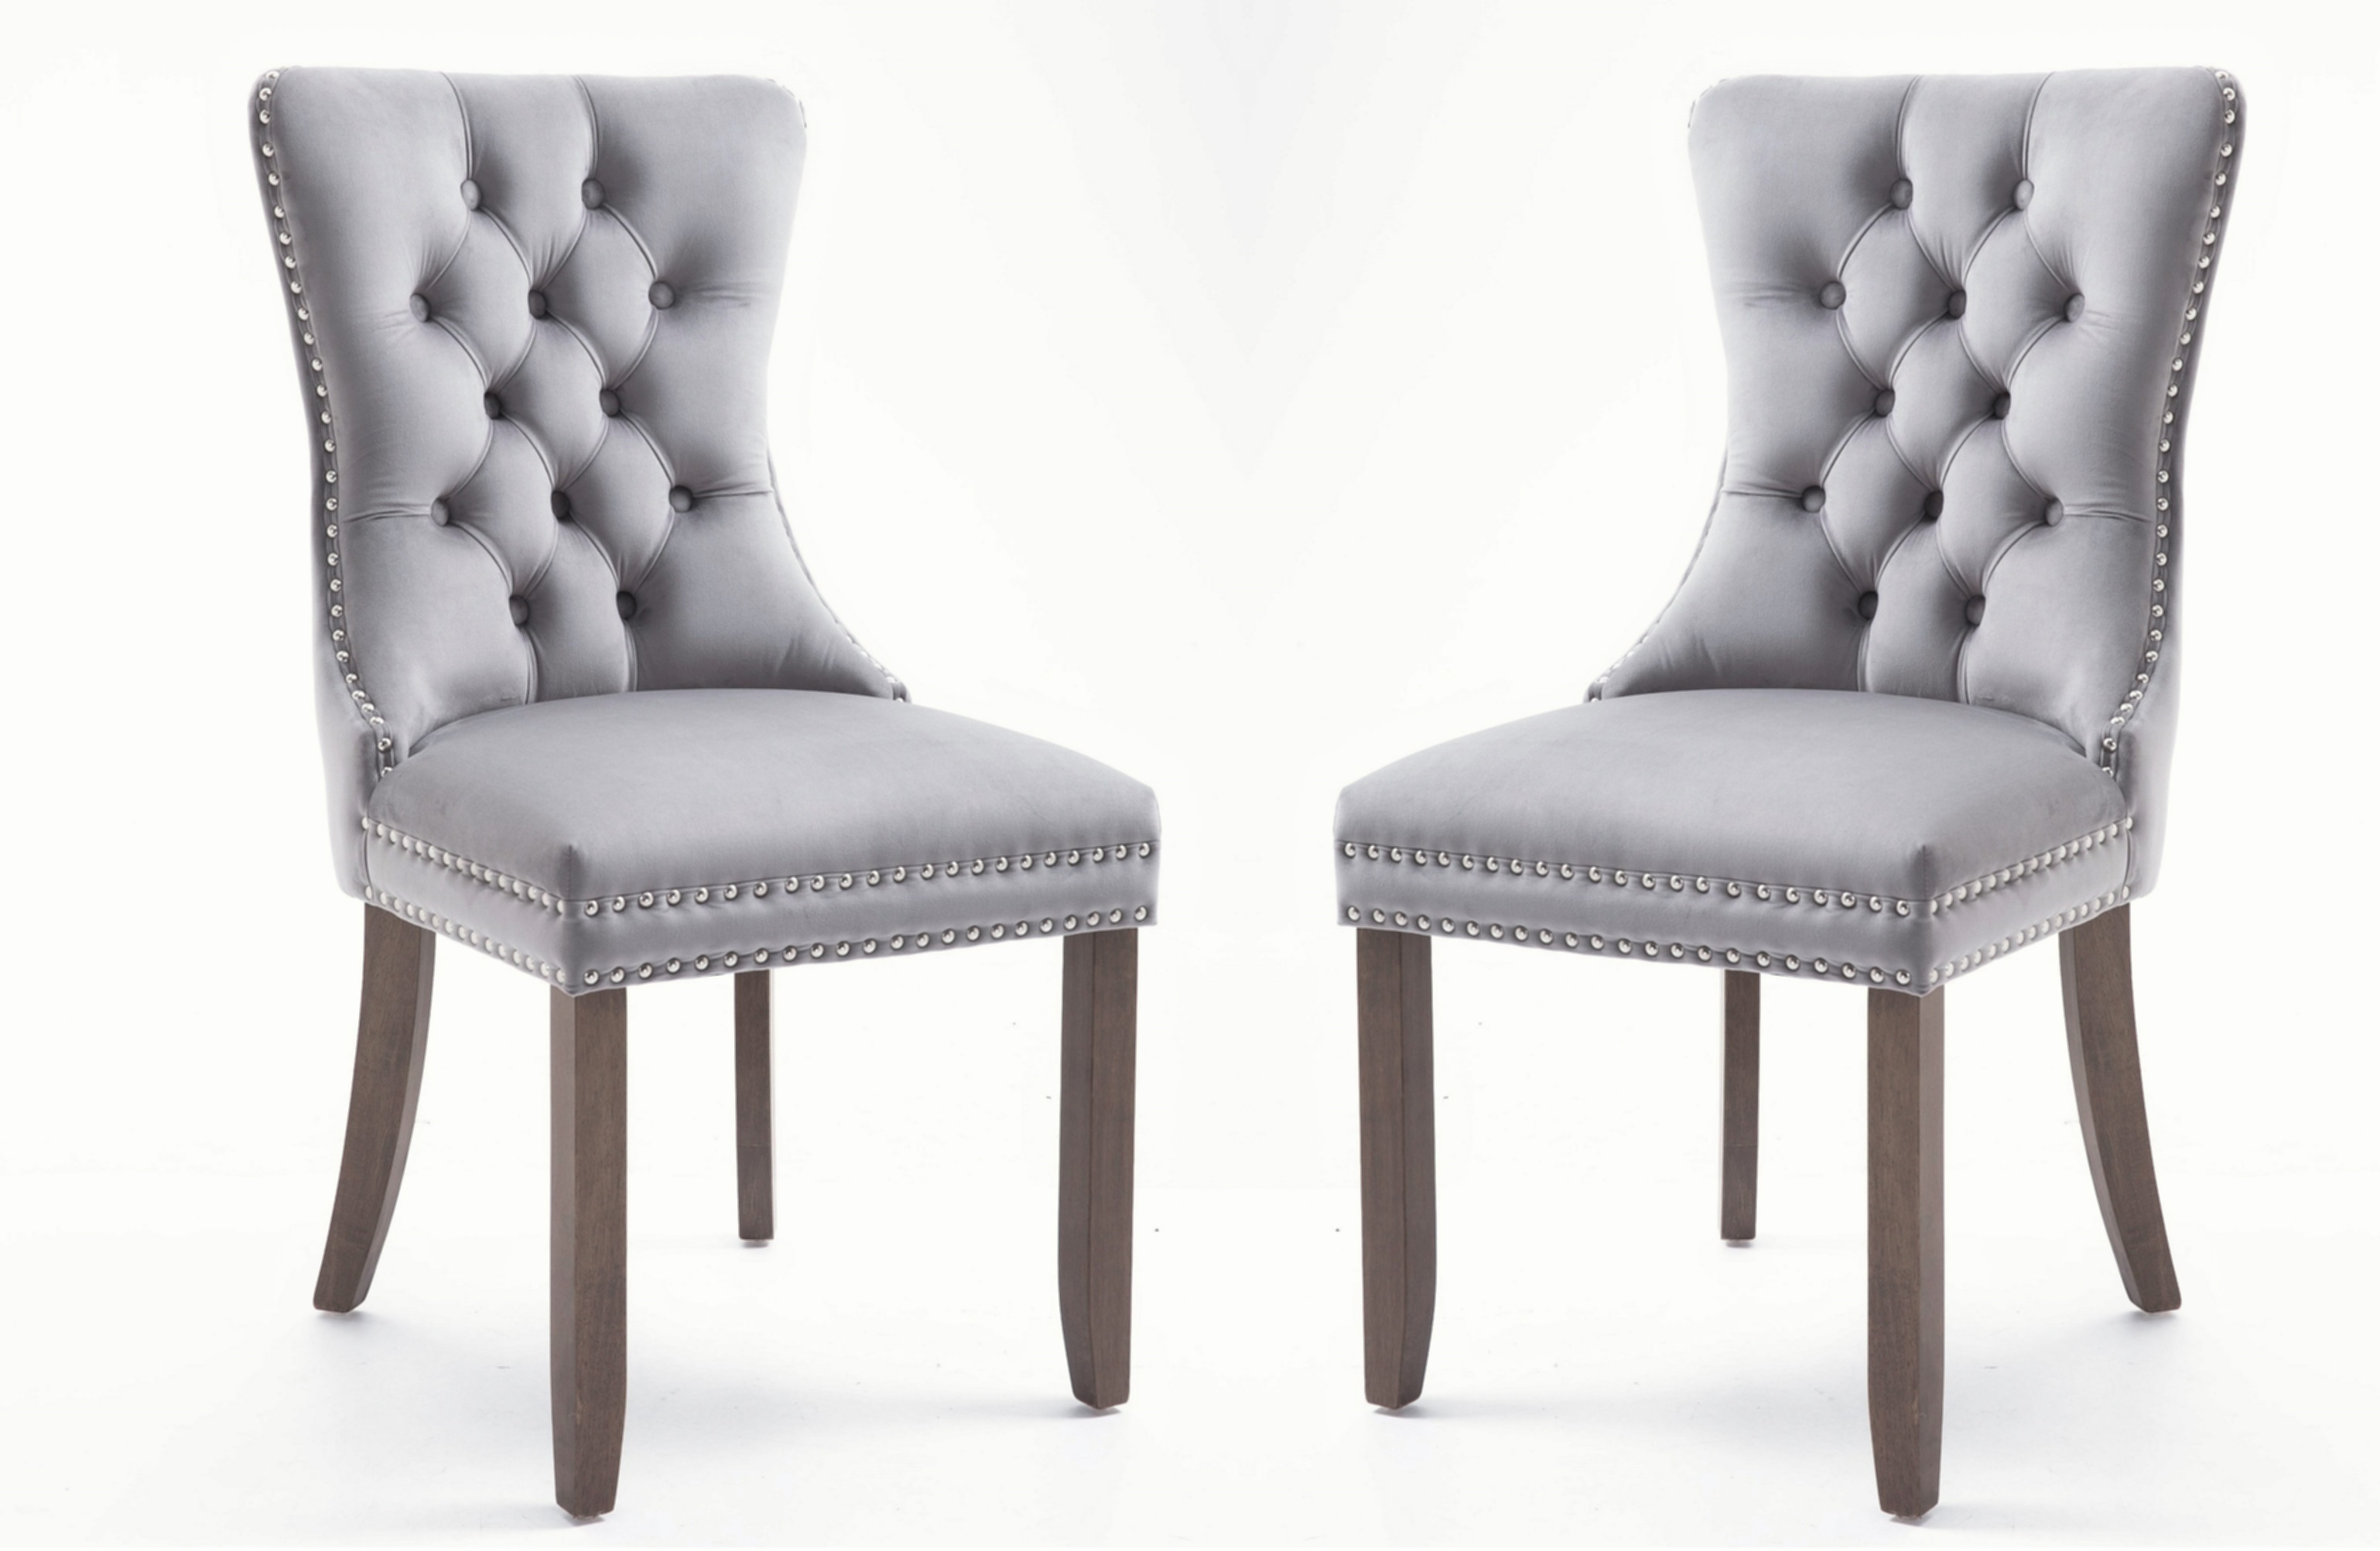 High-end Tufted Solid Wood Upholstered Grey Dining Chair with Nailhead Trim 2 PCS-CASAINC